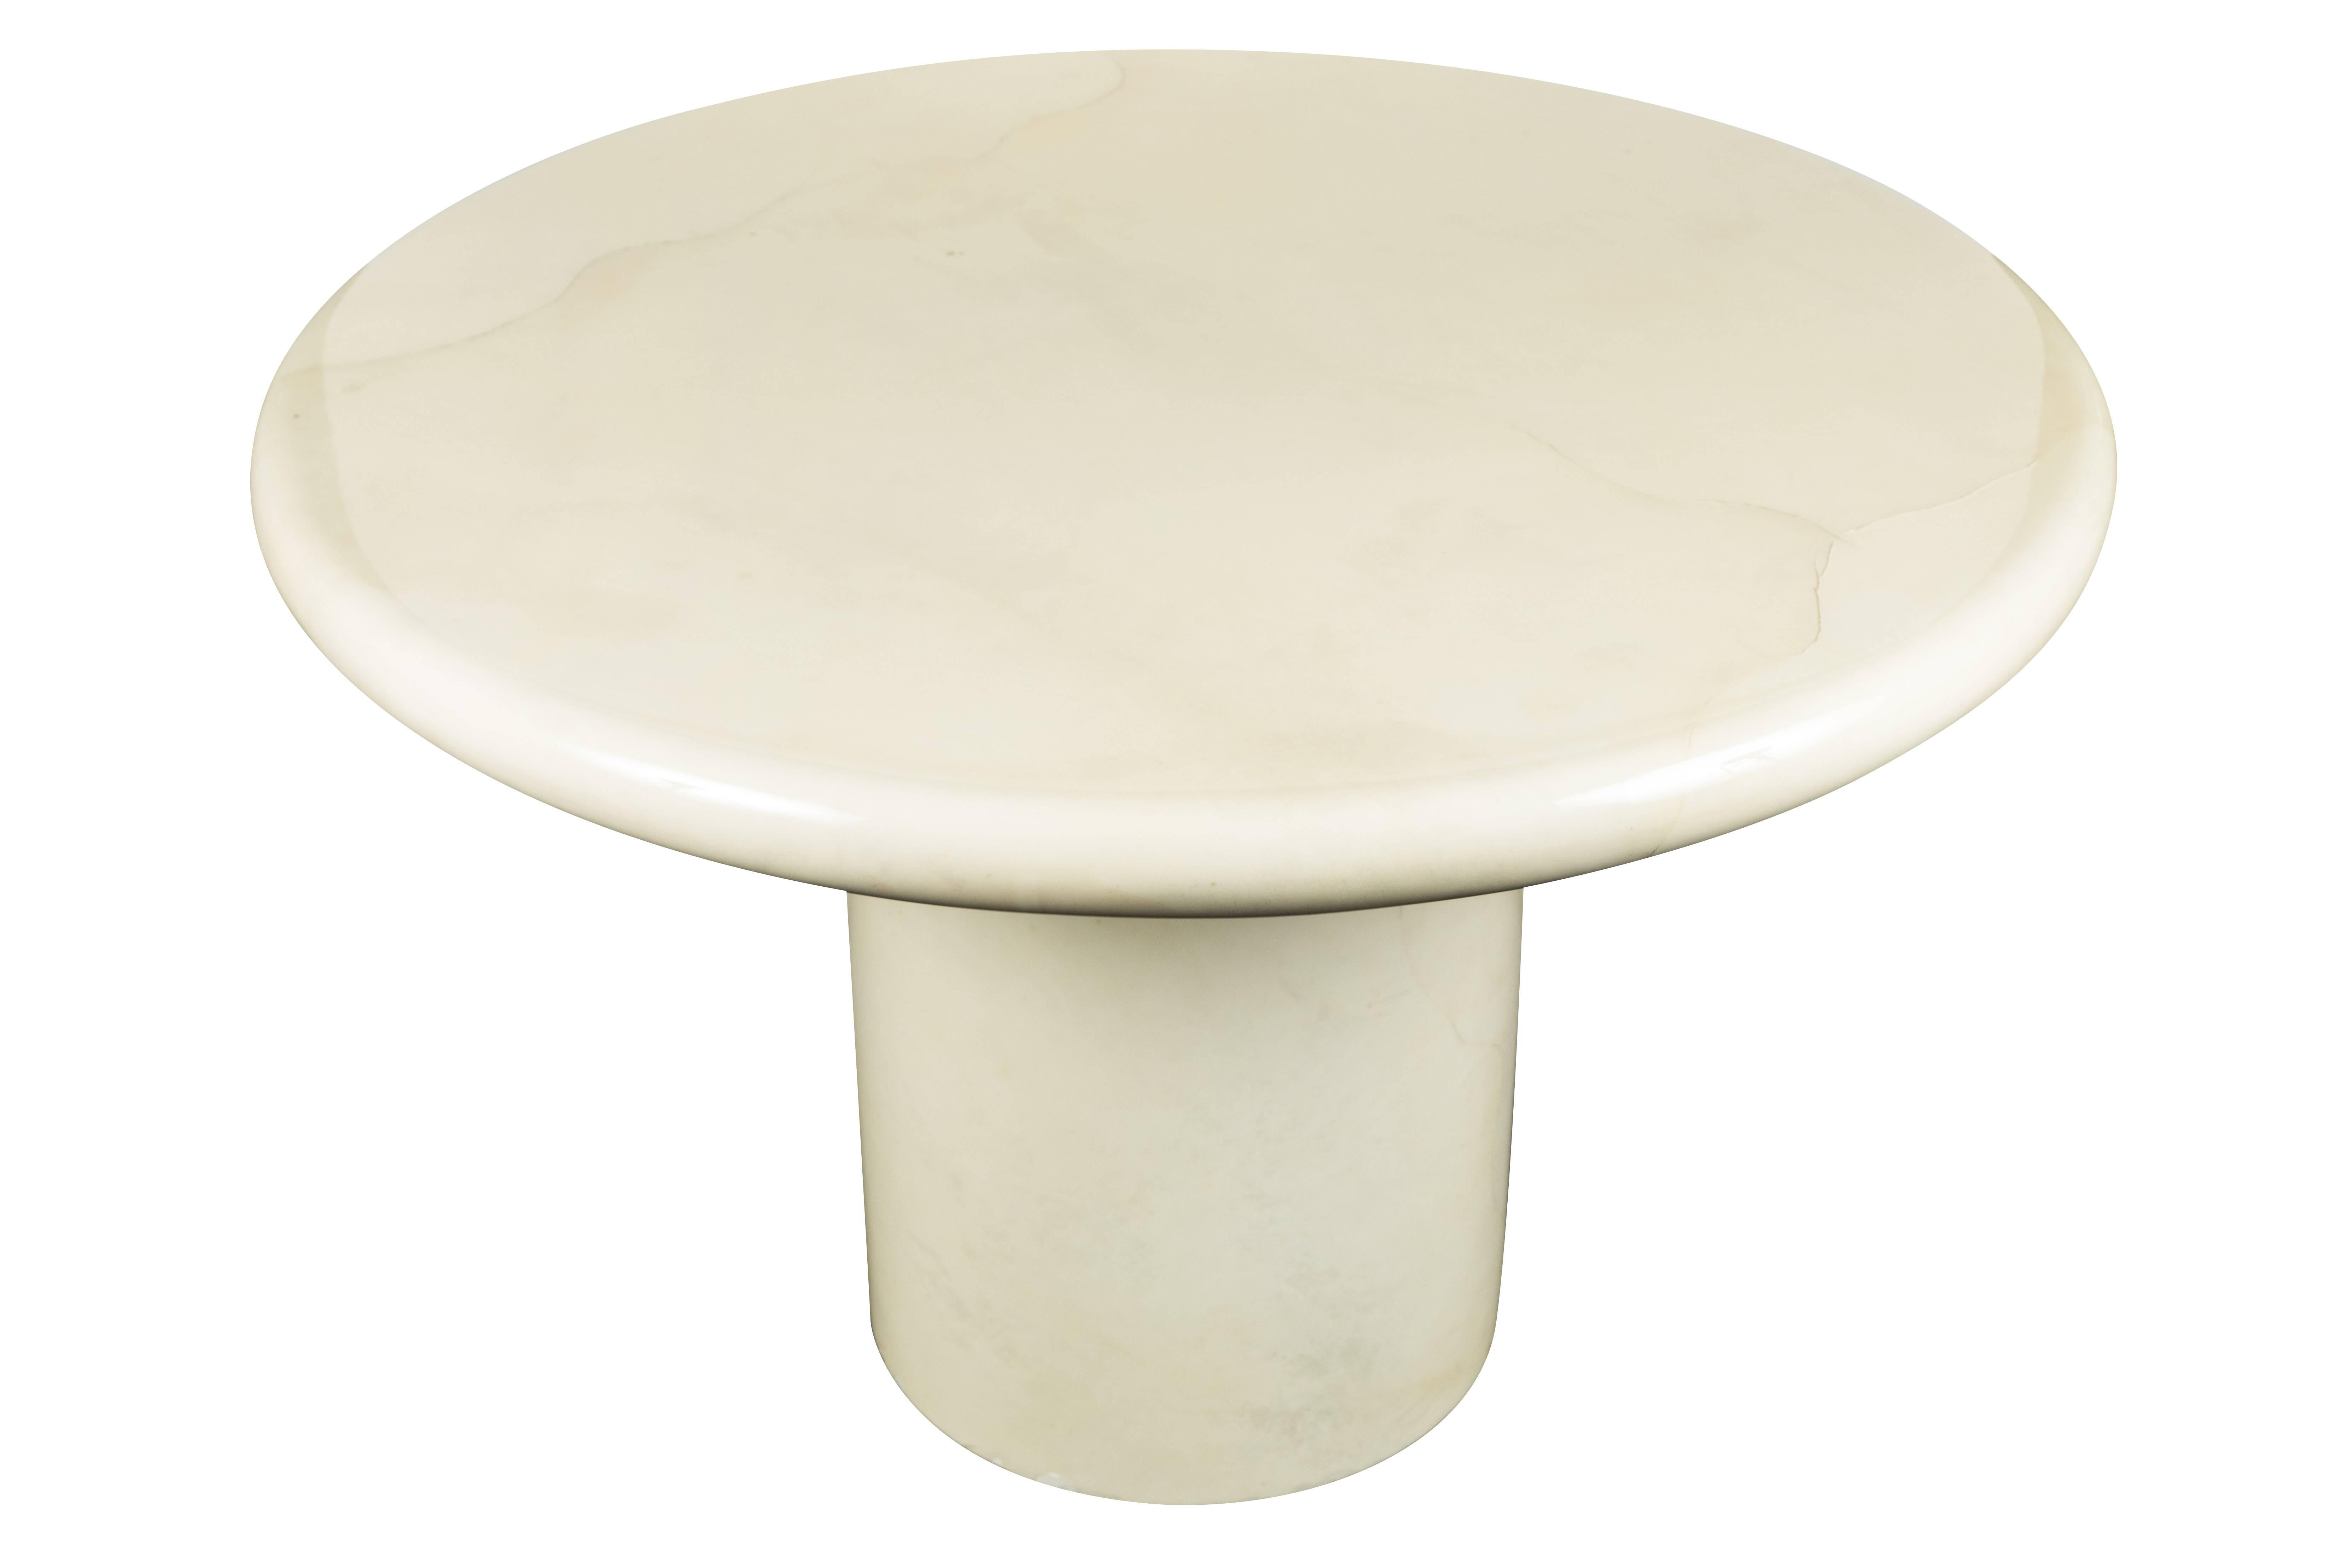 Round, sculptural, center or dining table by Karl Springer. Clad in Ivory colored goatskin, with high gloss lacquer finish.